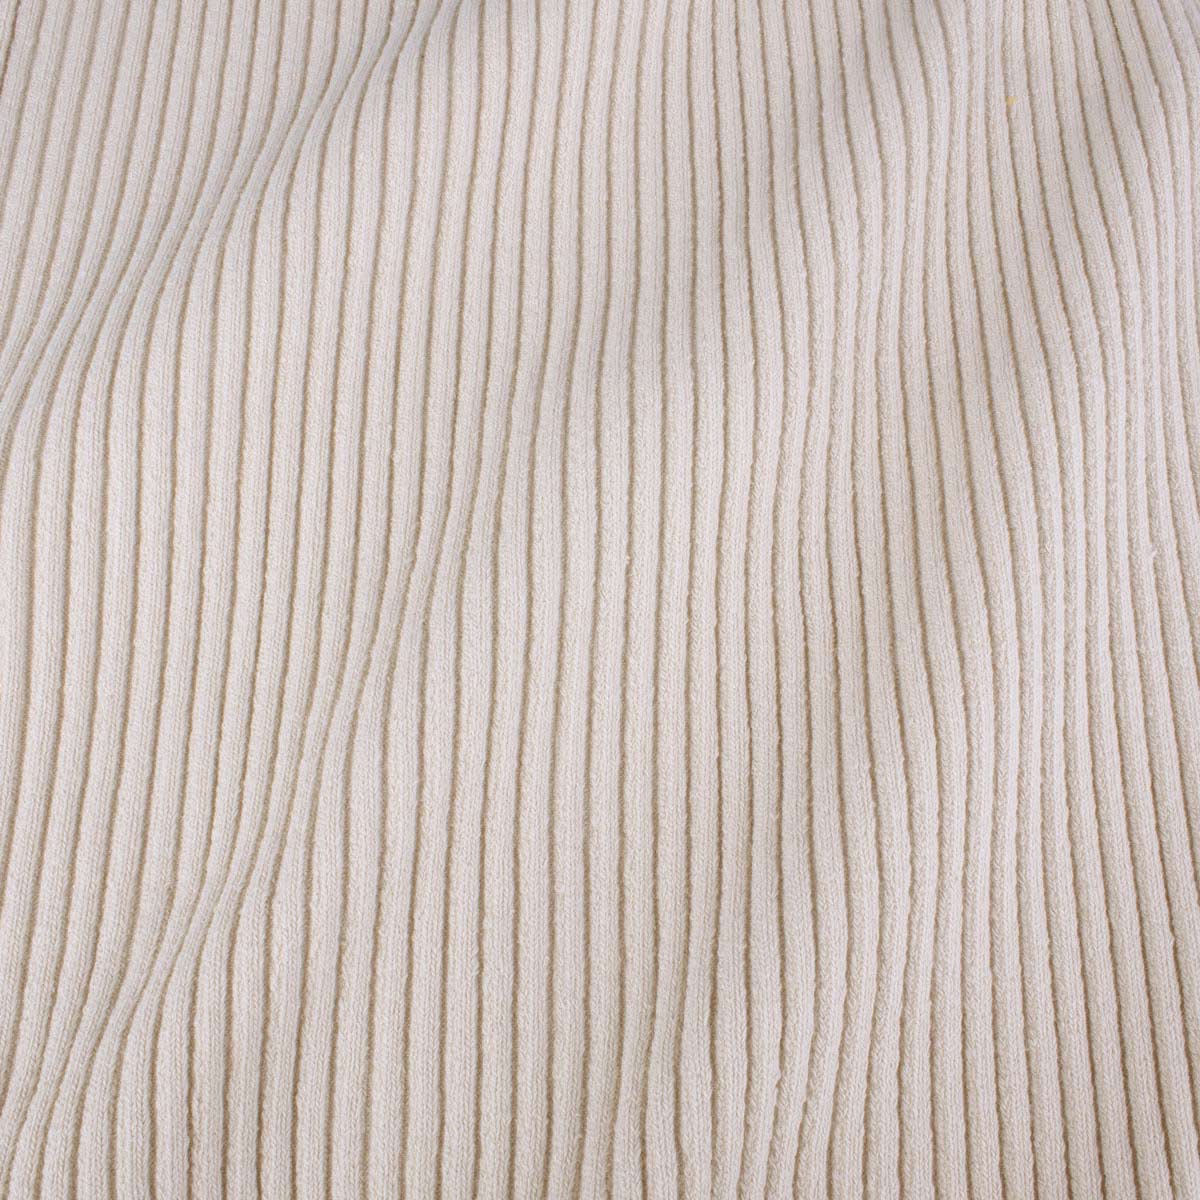 Organic cotton wide rib in rosted almond colour